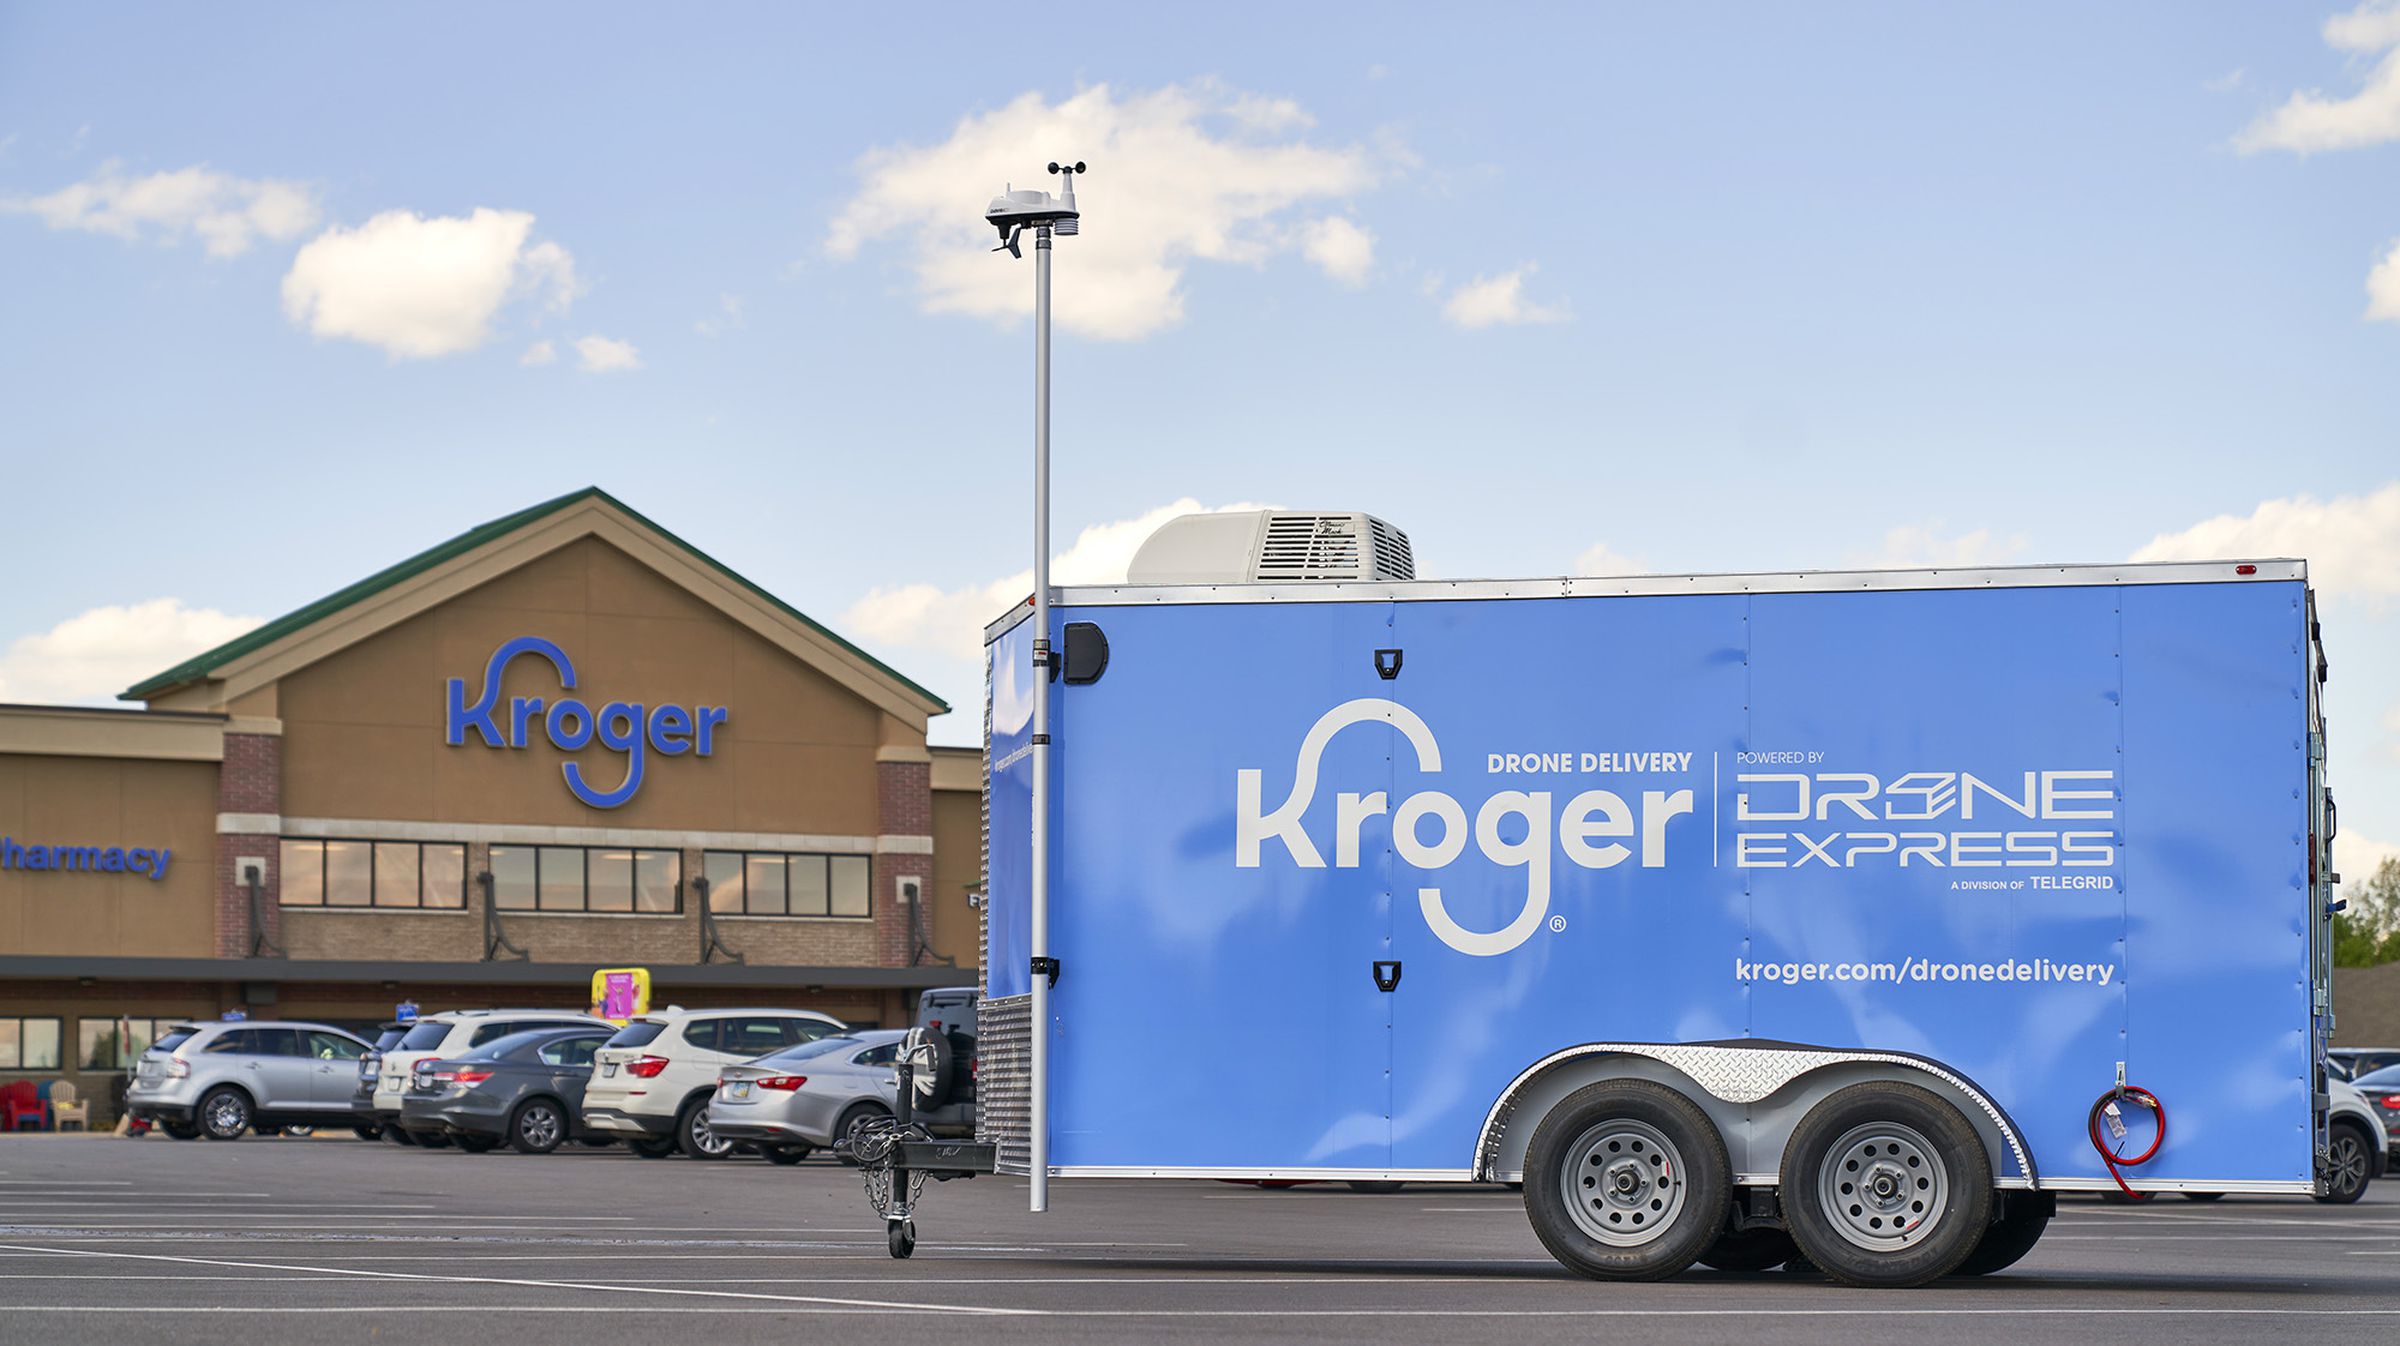 A Drone Express flight management trailer parked at Krogers.